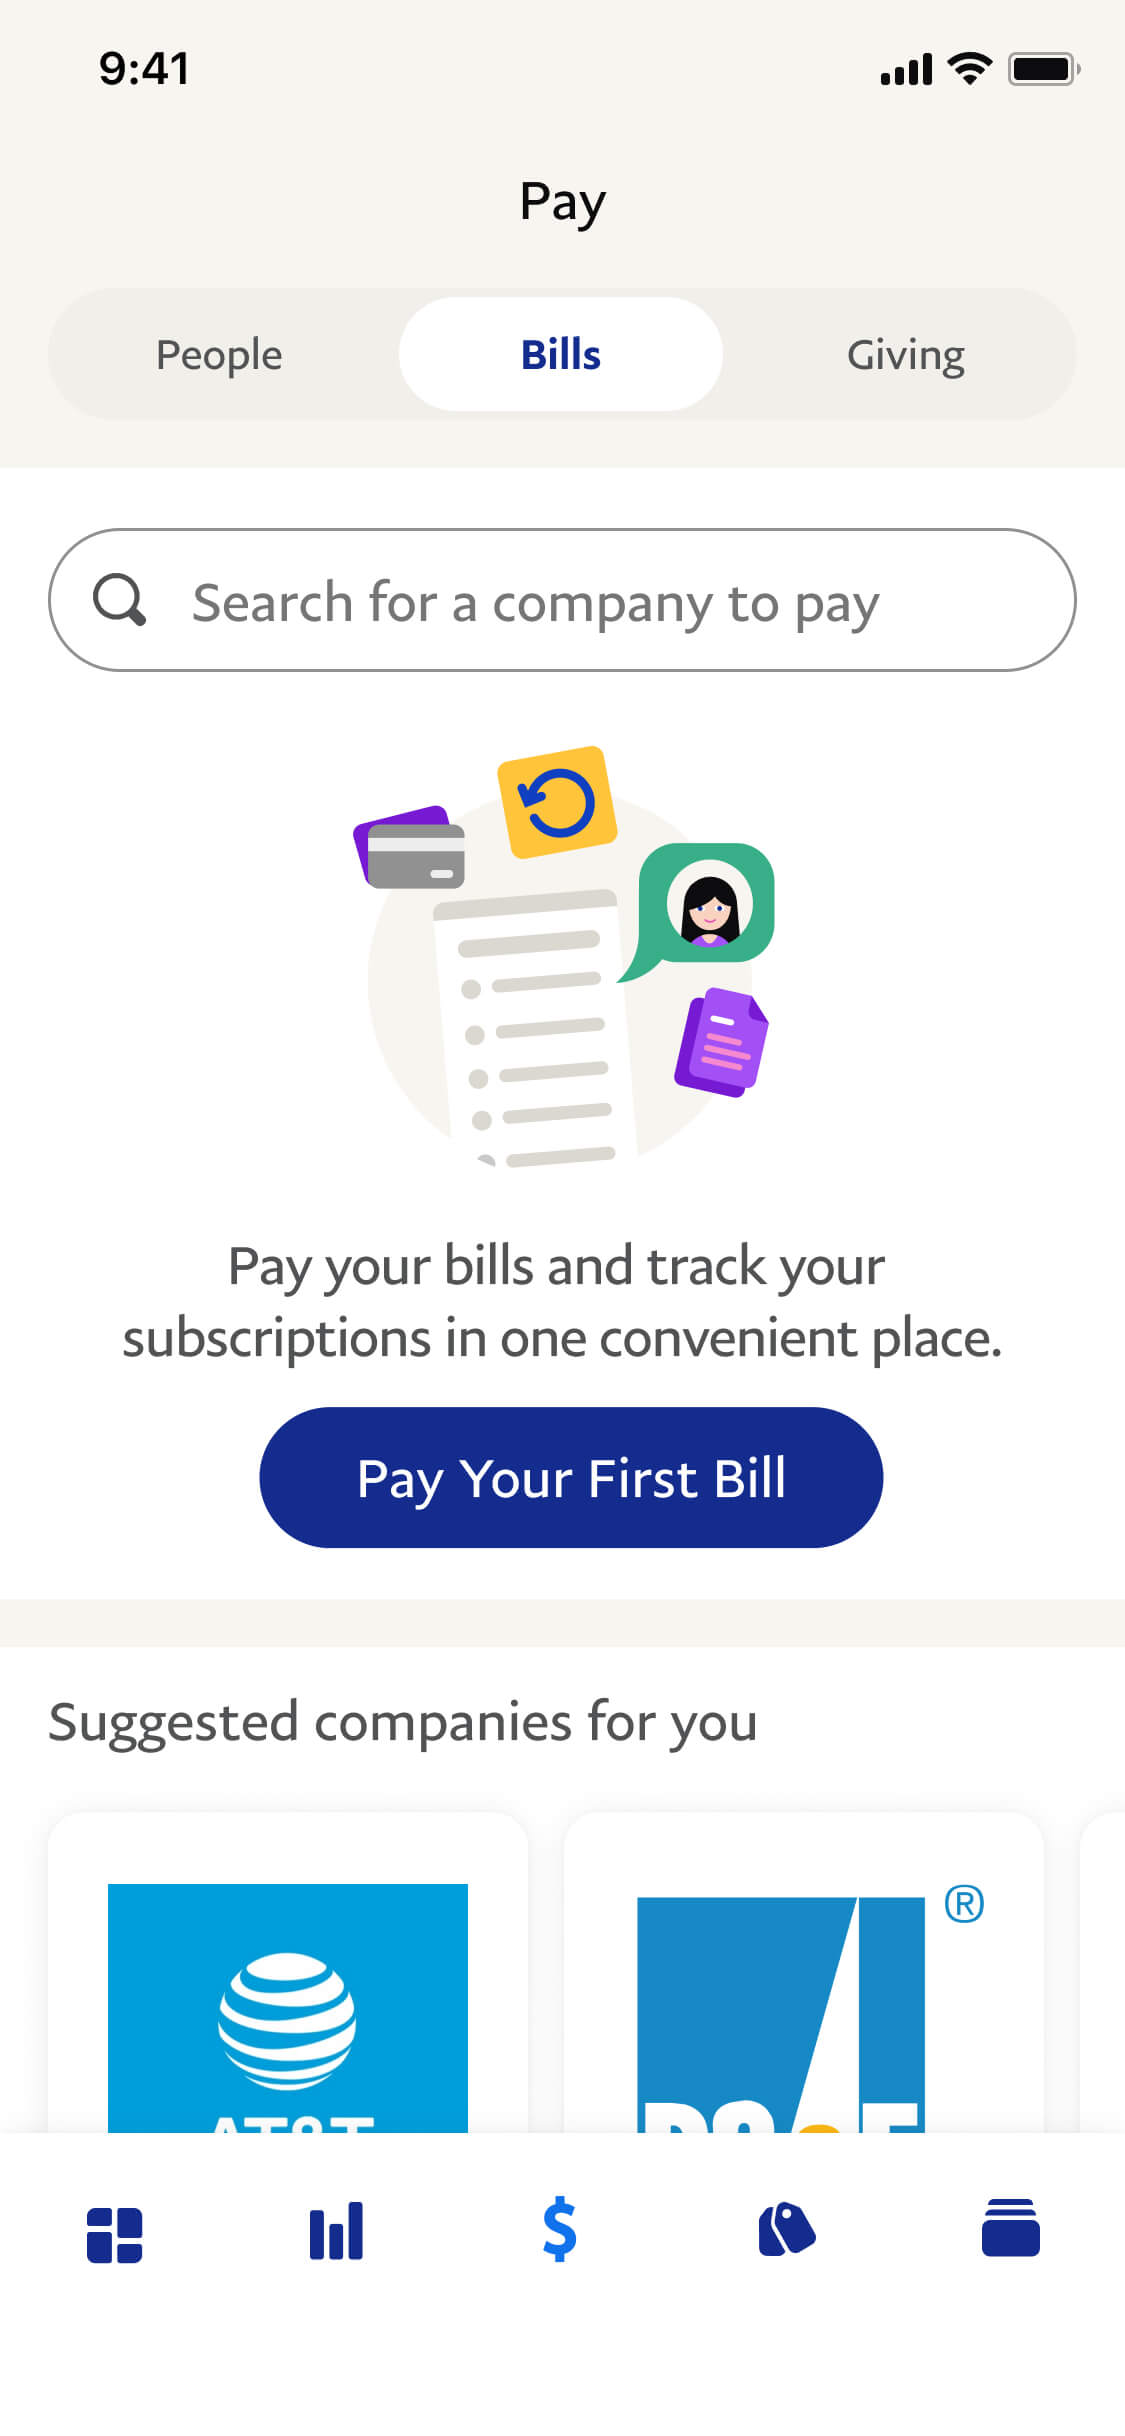 Select Pay Your First Bill